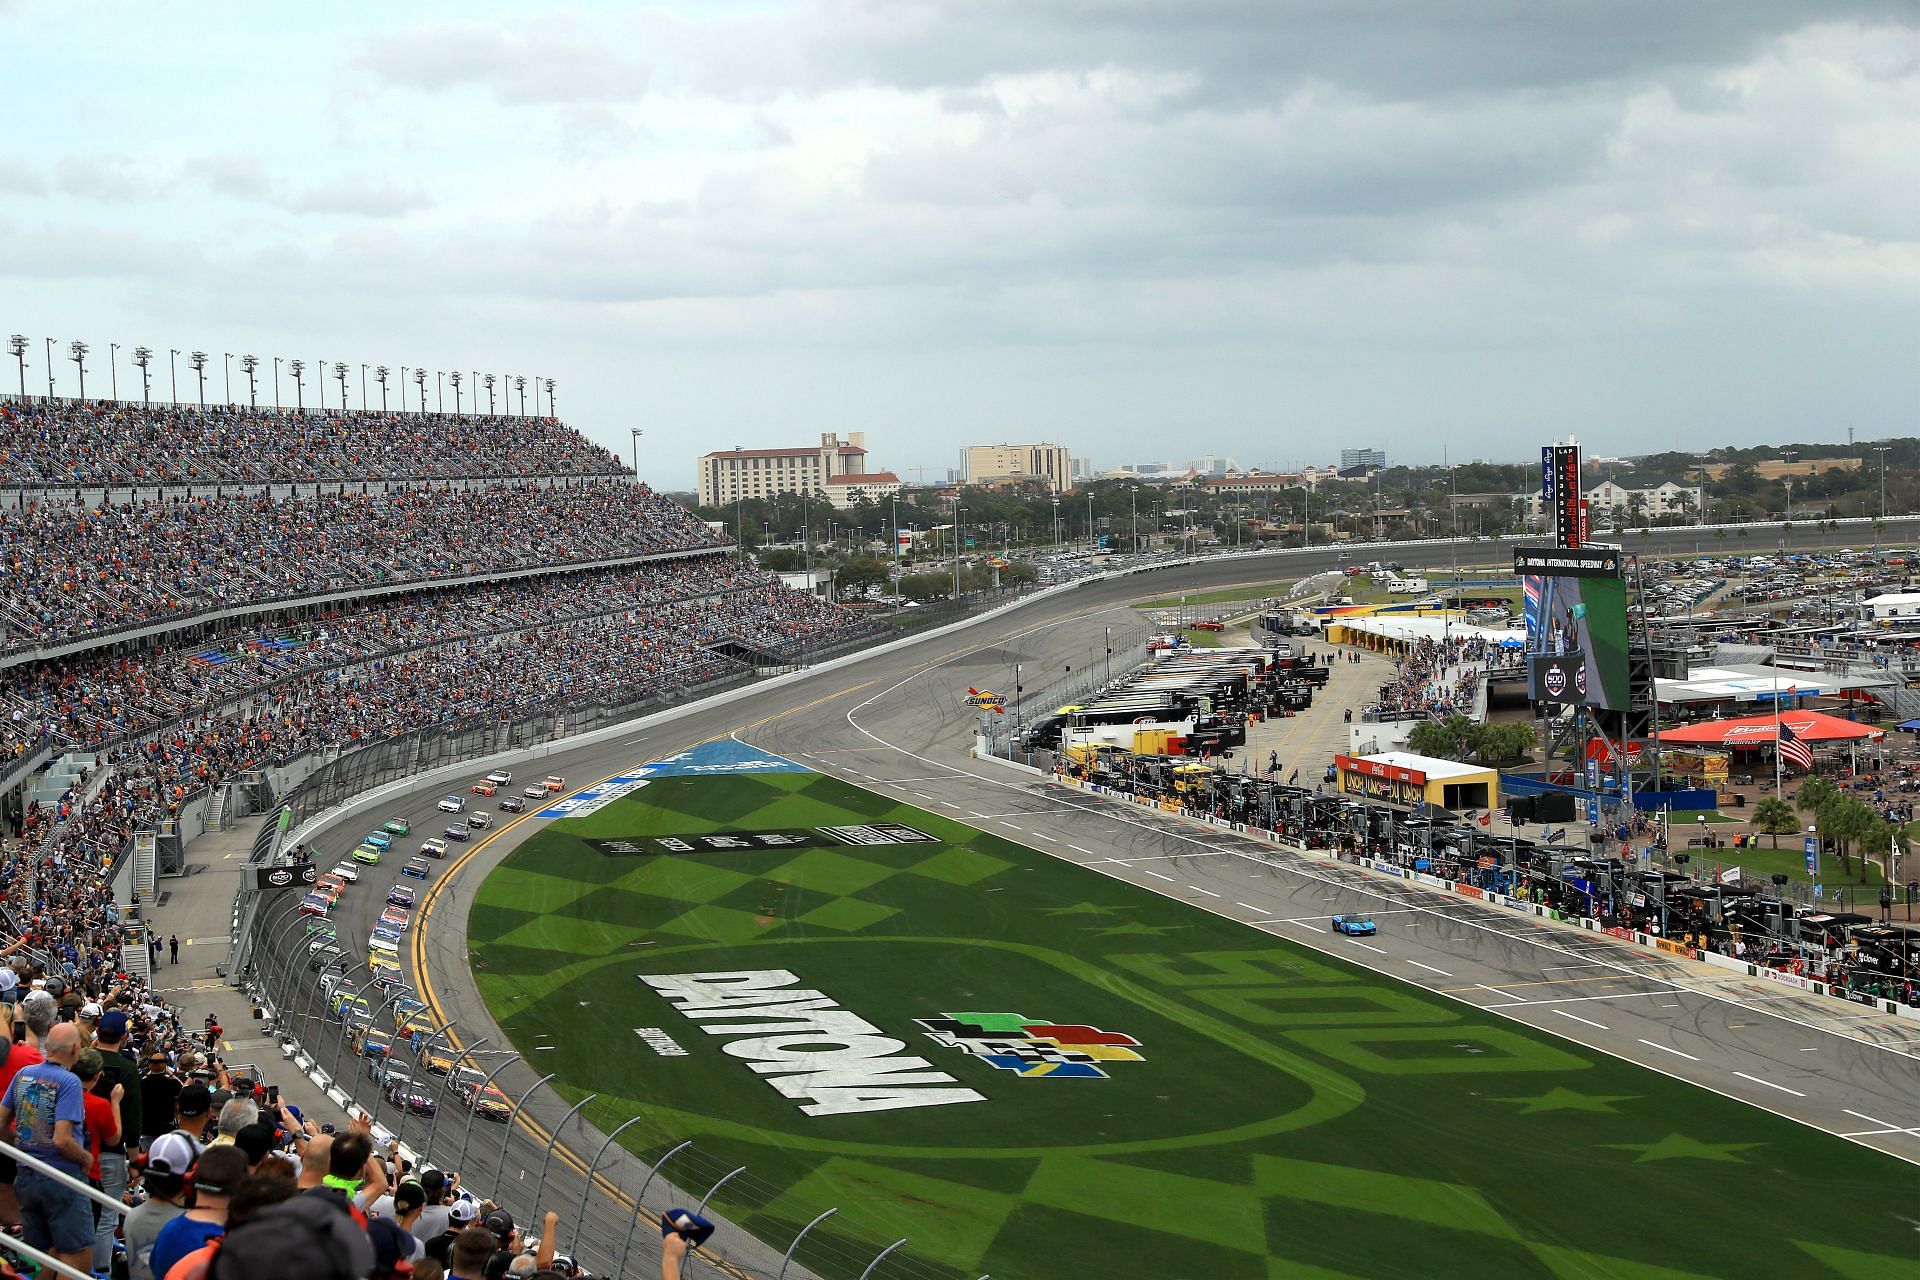 A general view of the start of the NASCAR Cup Series 63rd Annual Daytona 500 at Daytona International Speedway (Photo by Mike Ehrmann/Getty Images)